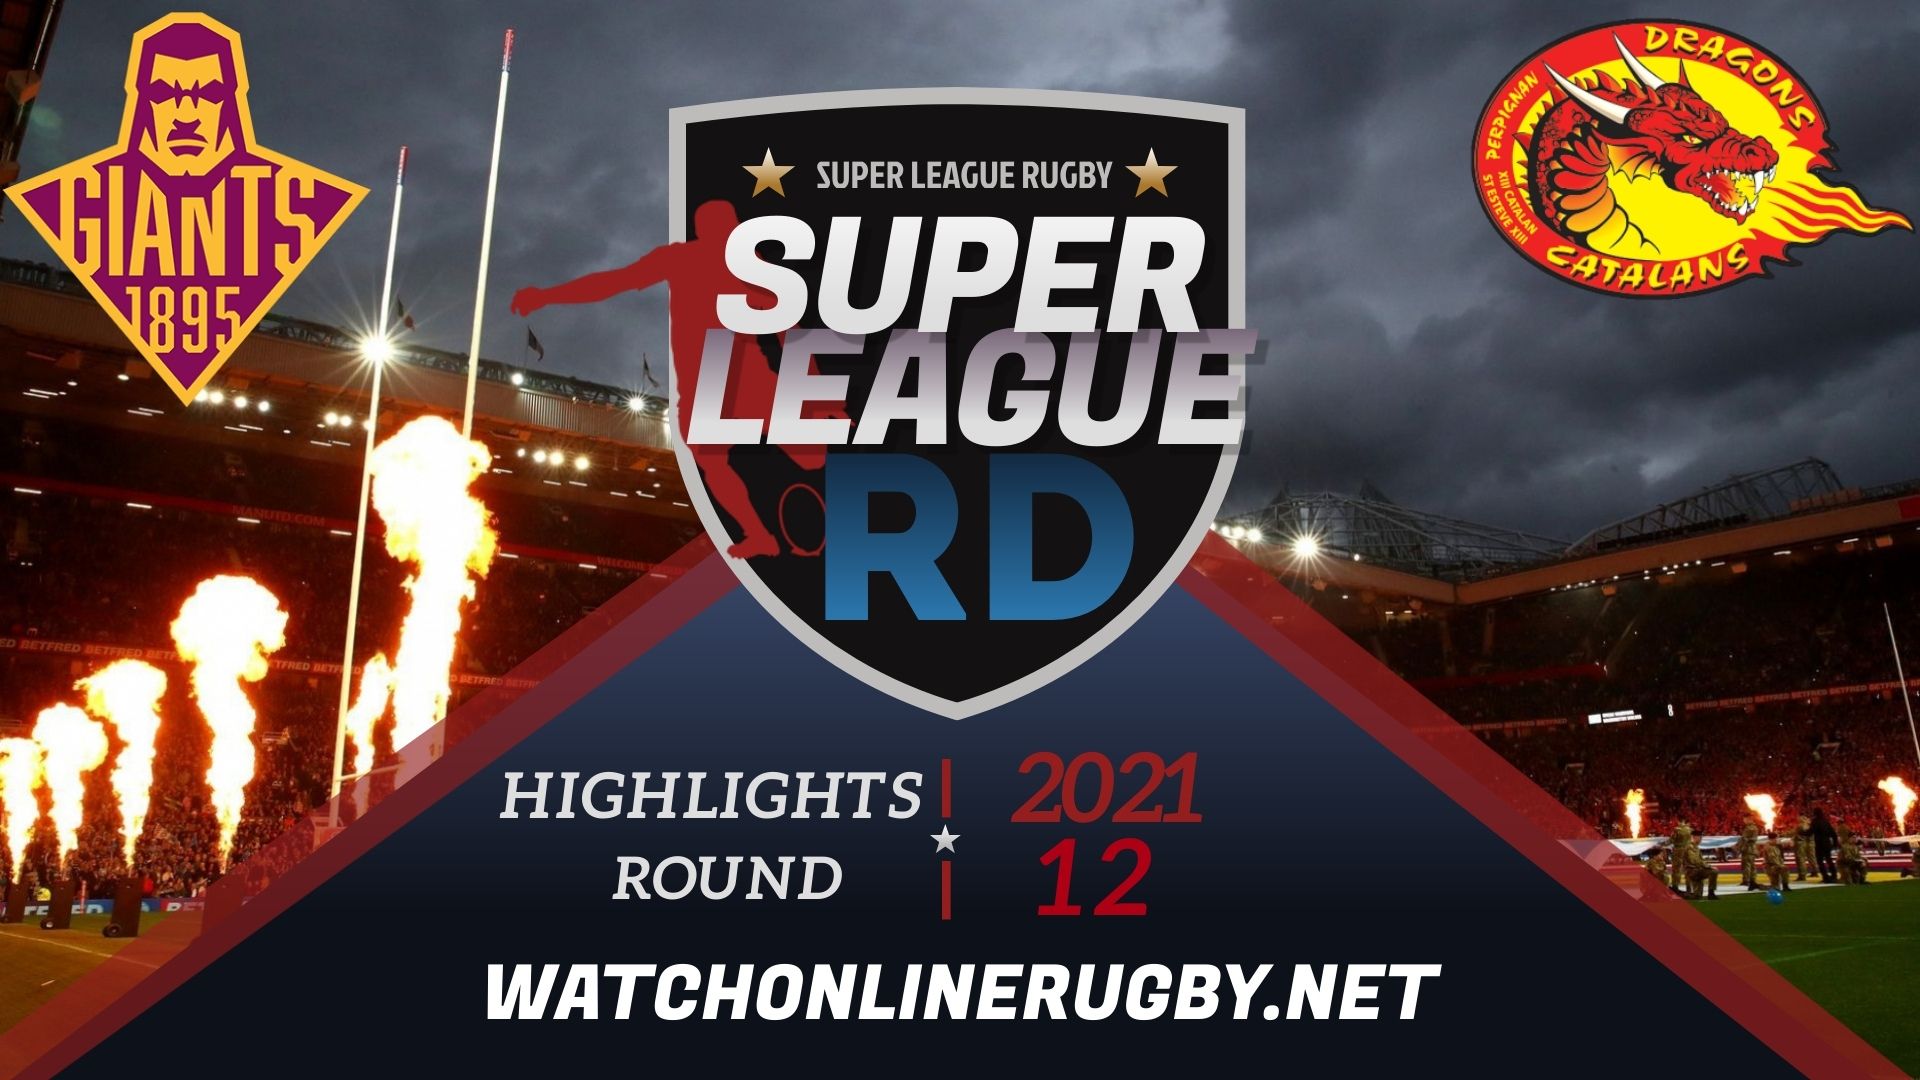 Huddersfield Giants Vs Catalans Dragons Super League Rugby 2021 RD 12